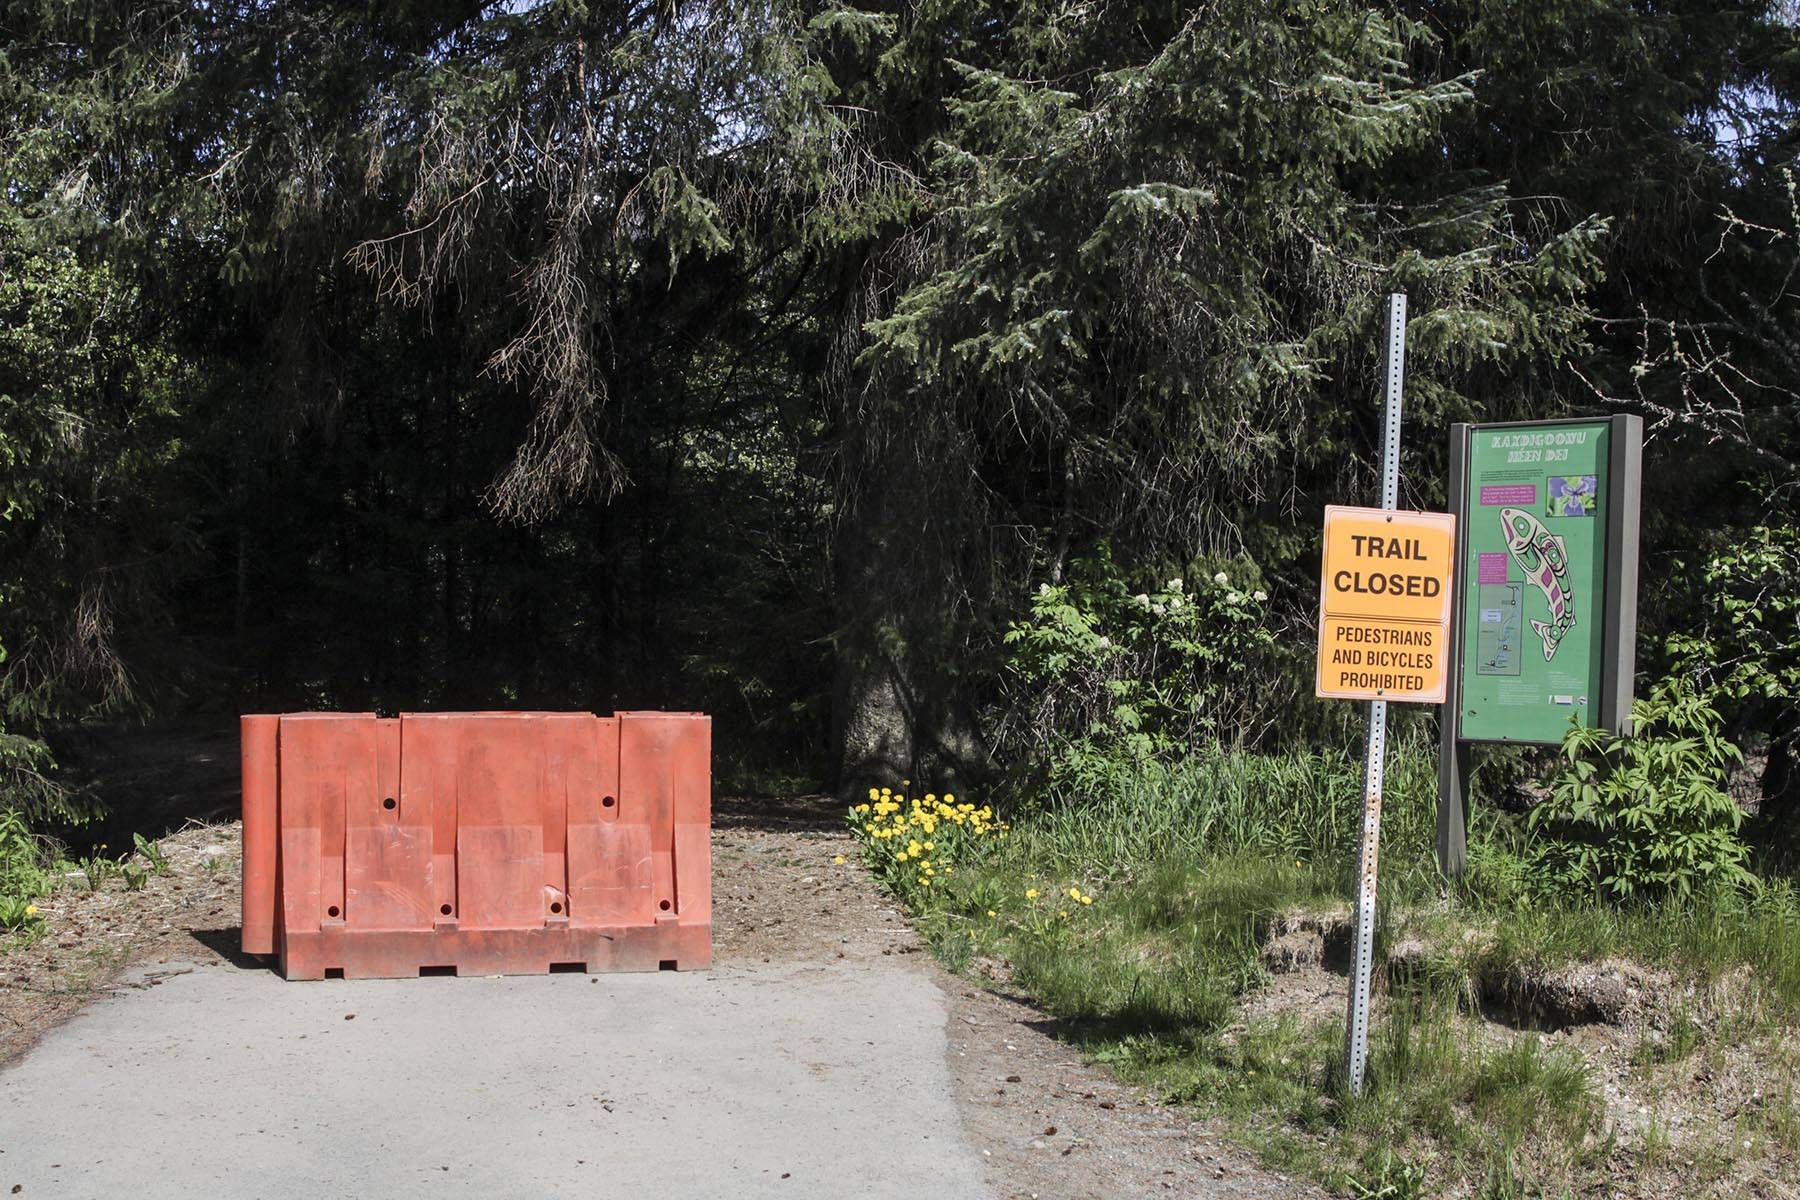 The old Kaxdigoowu Héen Dei (Brotherhood Bridge Trail) is closed to all traffic while replanting of local plants is going on, May 27, 2020. The trail has been moved, repaved, and reopened after riverbank erosion threatened the original trail. (Michael S. Lockett | Juneau Empire)